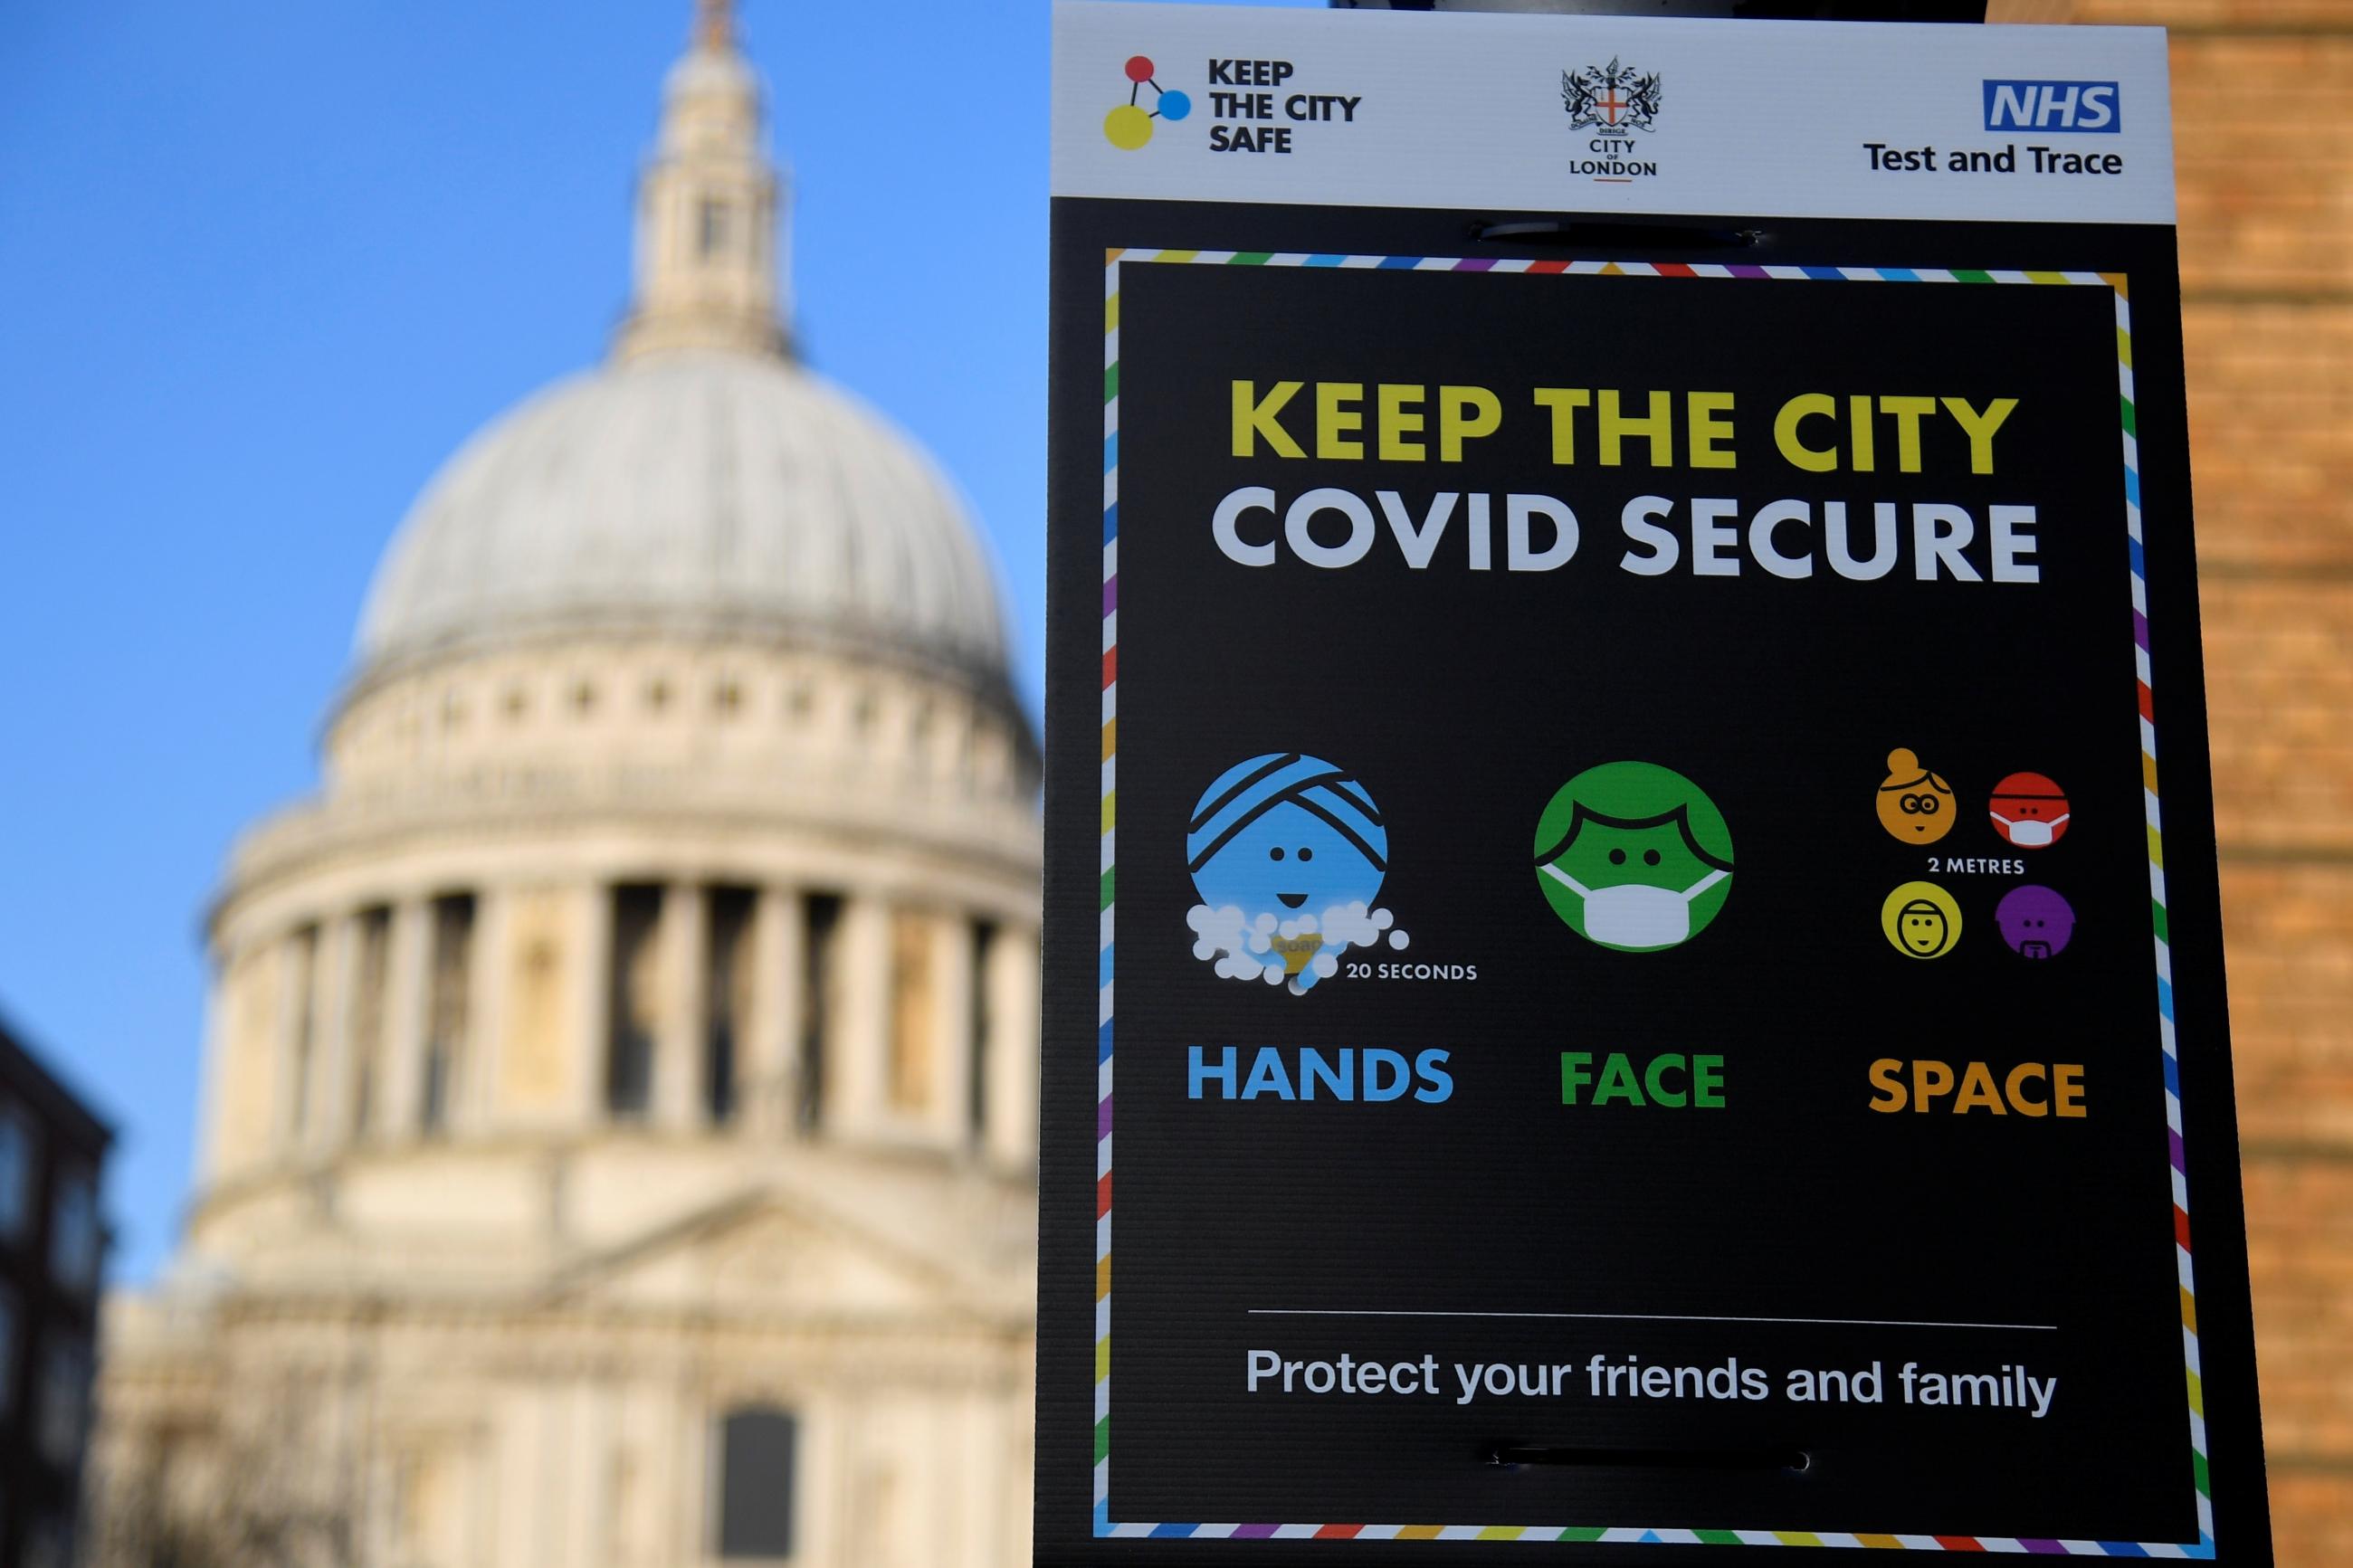 A public health information sign is seen with St. Paul's Cathedral seen behind amidst a lockdown during the spread of the coronavirus disease pandemic, London, Britain, January 7, 2021.